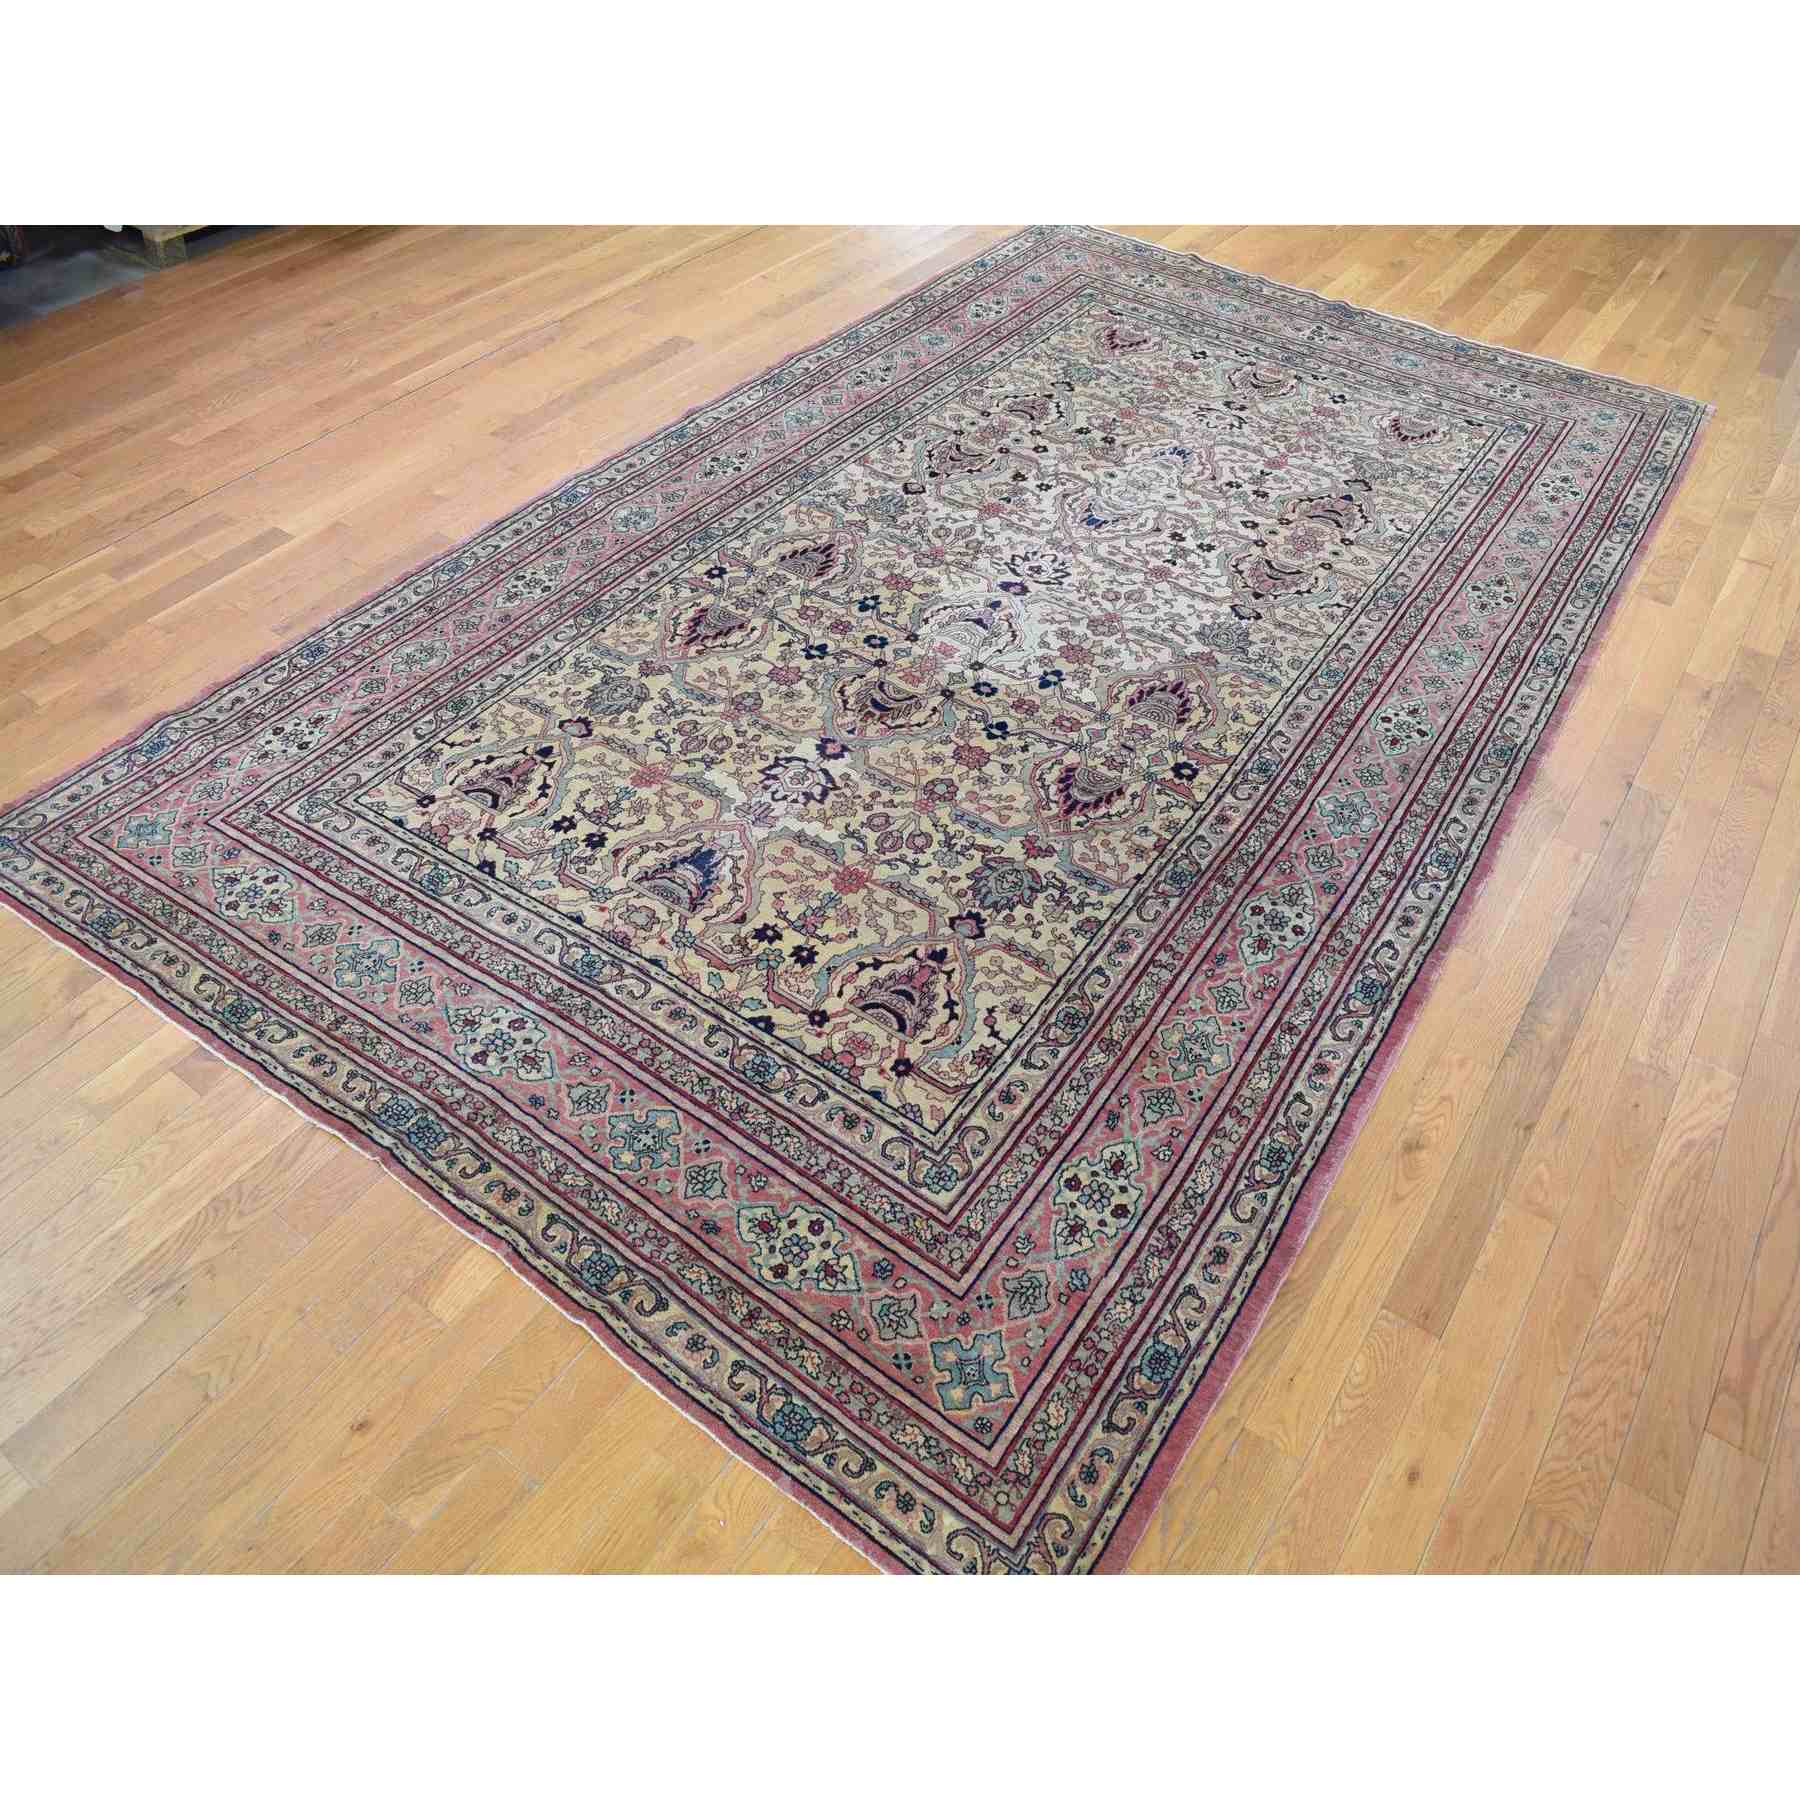 Antique-Hand-Knotted-Rug-400610